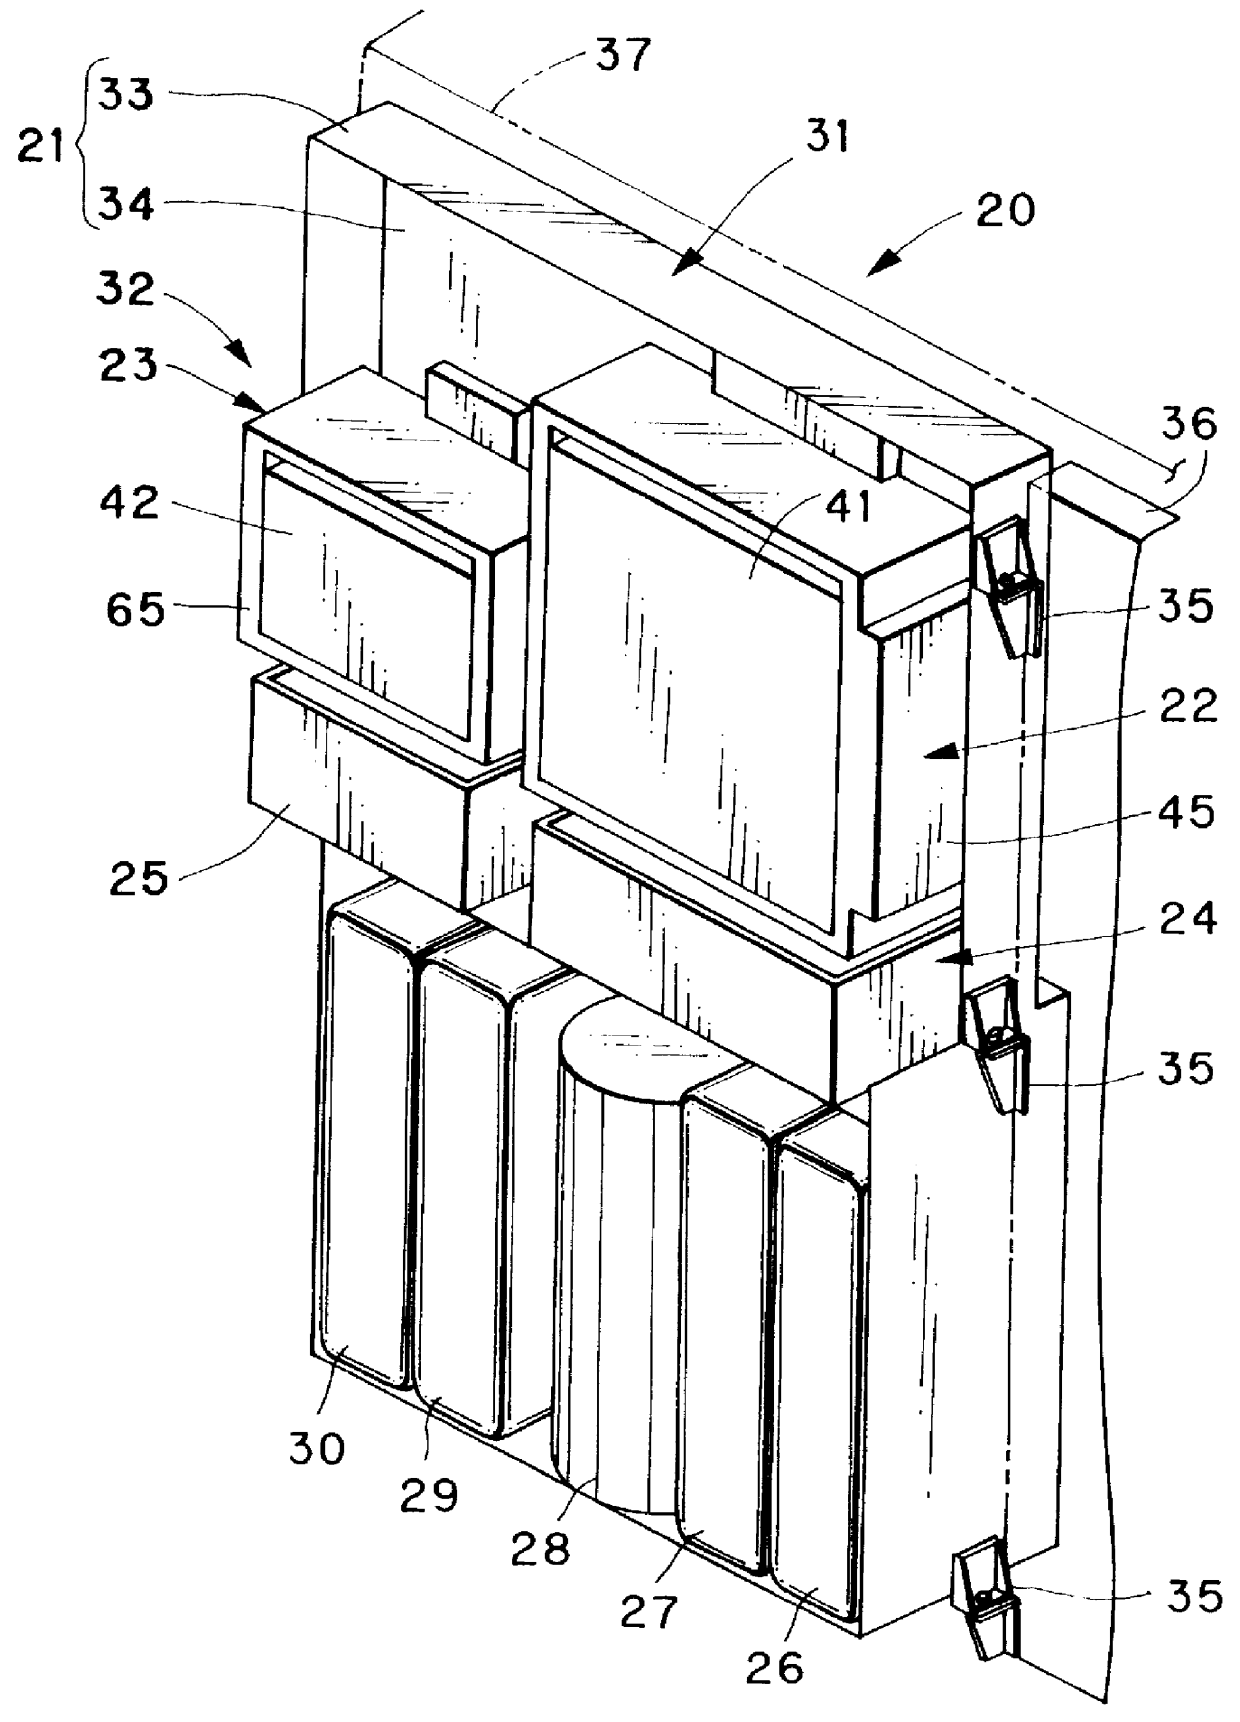 Replenisher supply device for photosensitive material processor